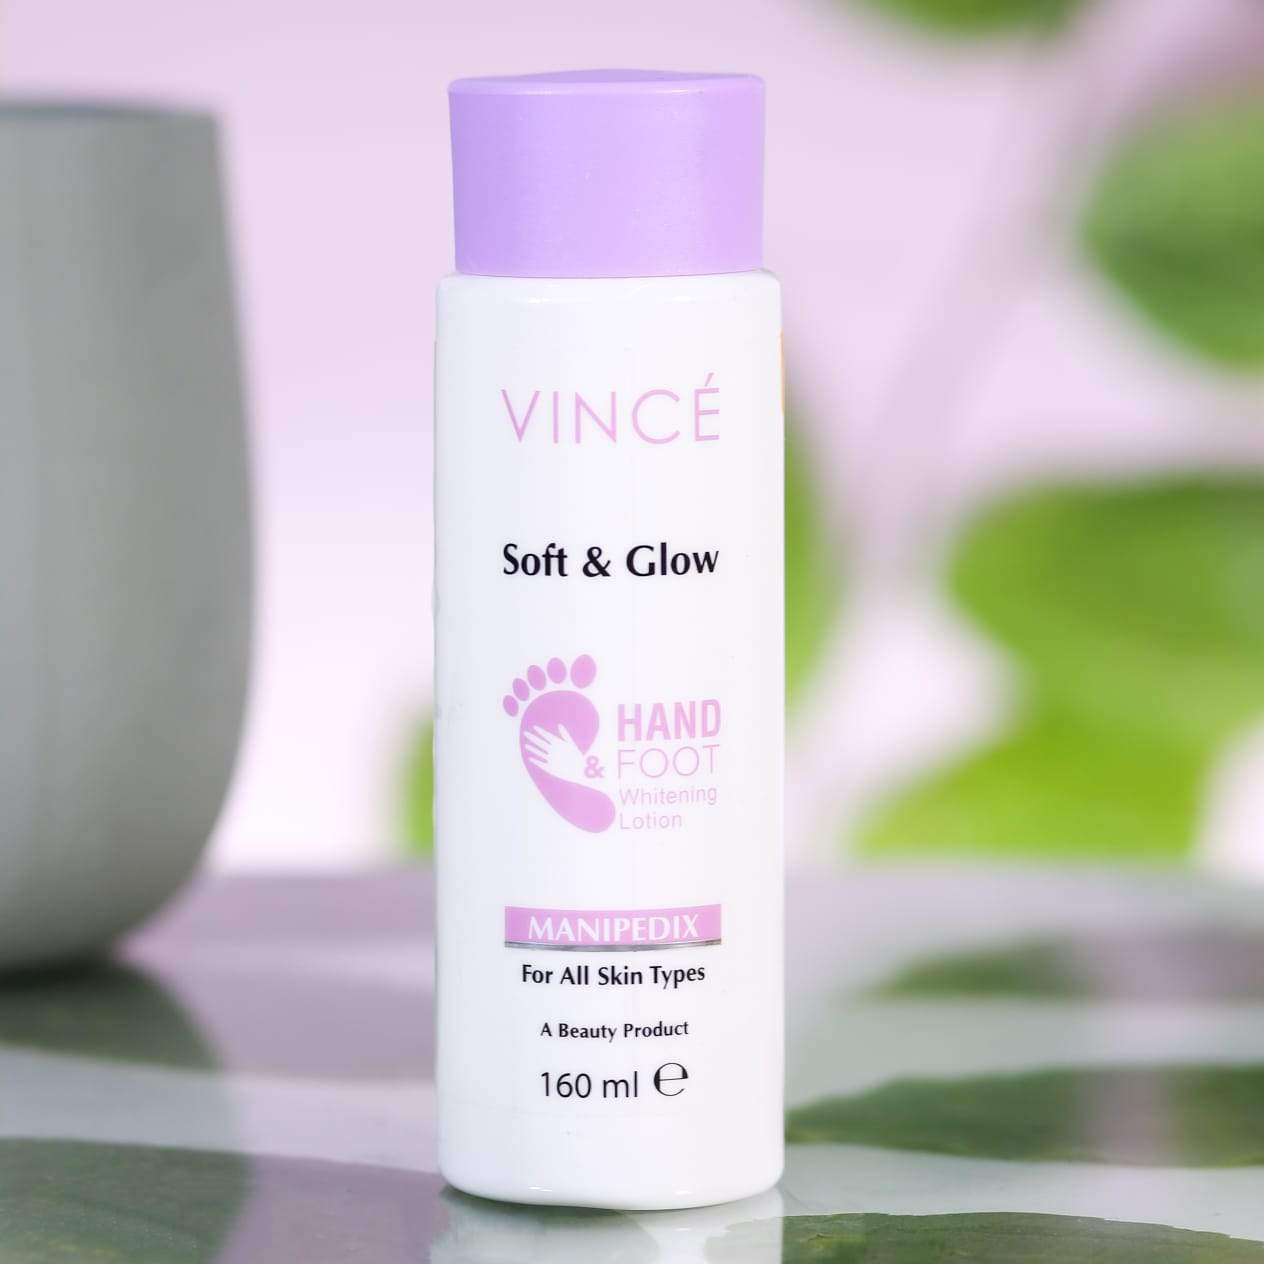 VINCE SOFT & GLOW HAND & FOOT WHITENING LOTION 160ML